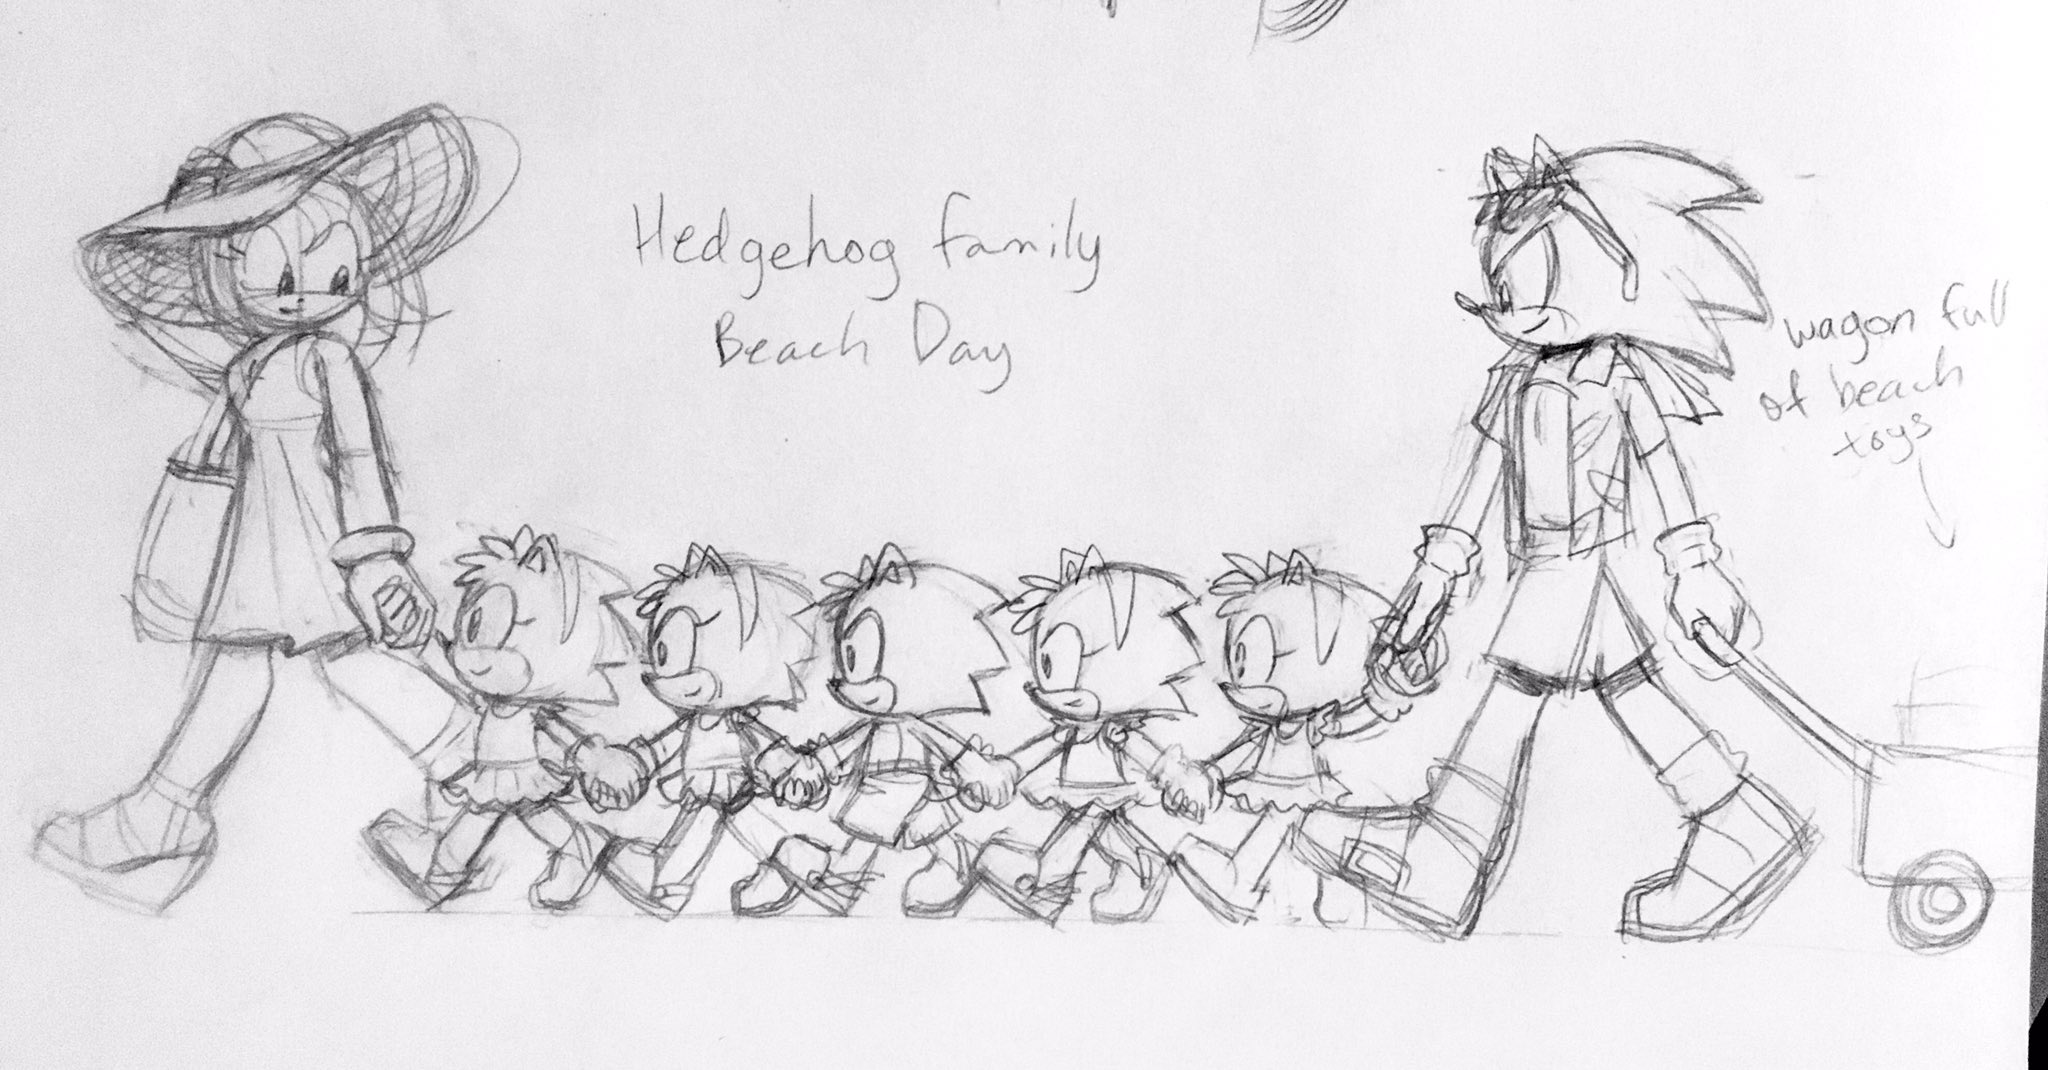 Queenie on X: Finally a decent picture of my Sonamy family! The kids are  quintuplets because real hedgehogs can have litters of 4-6 hoglets,  although some have had as many as 10 (